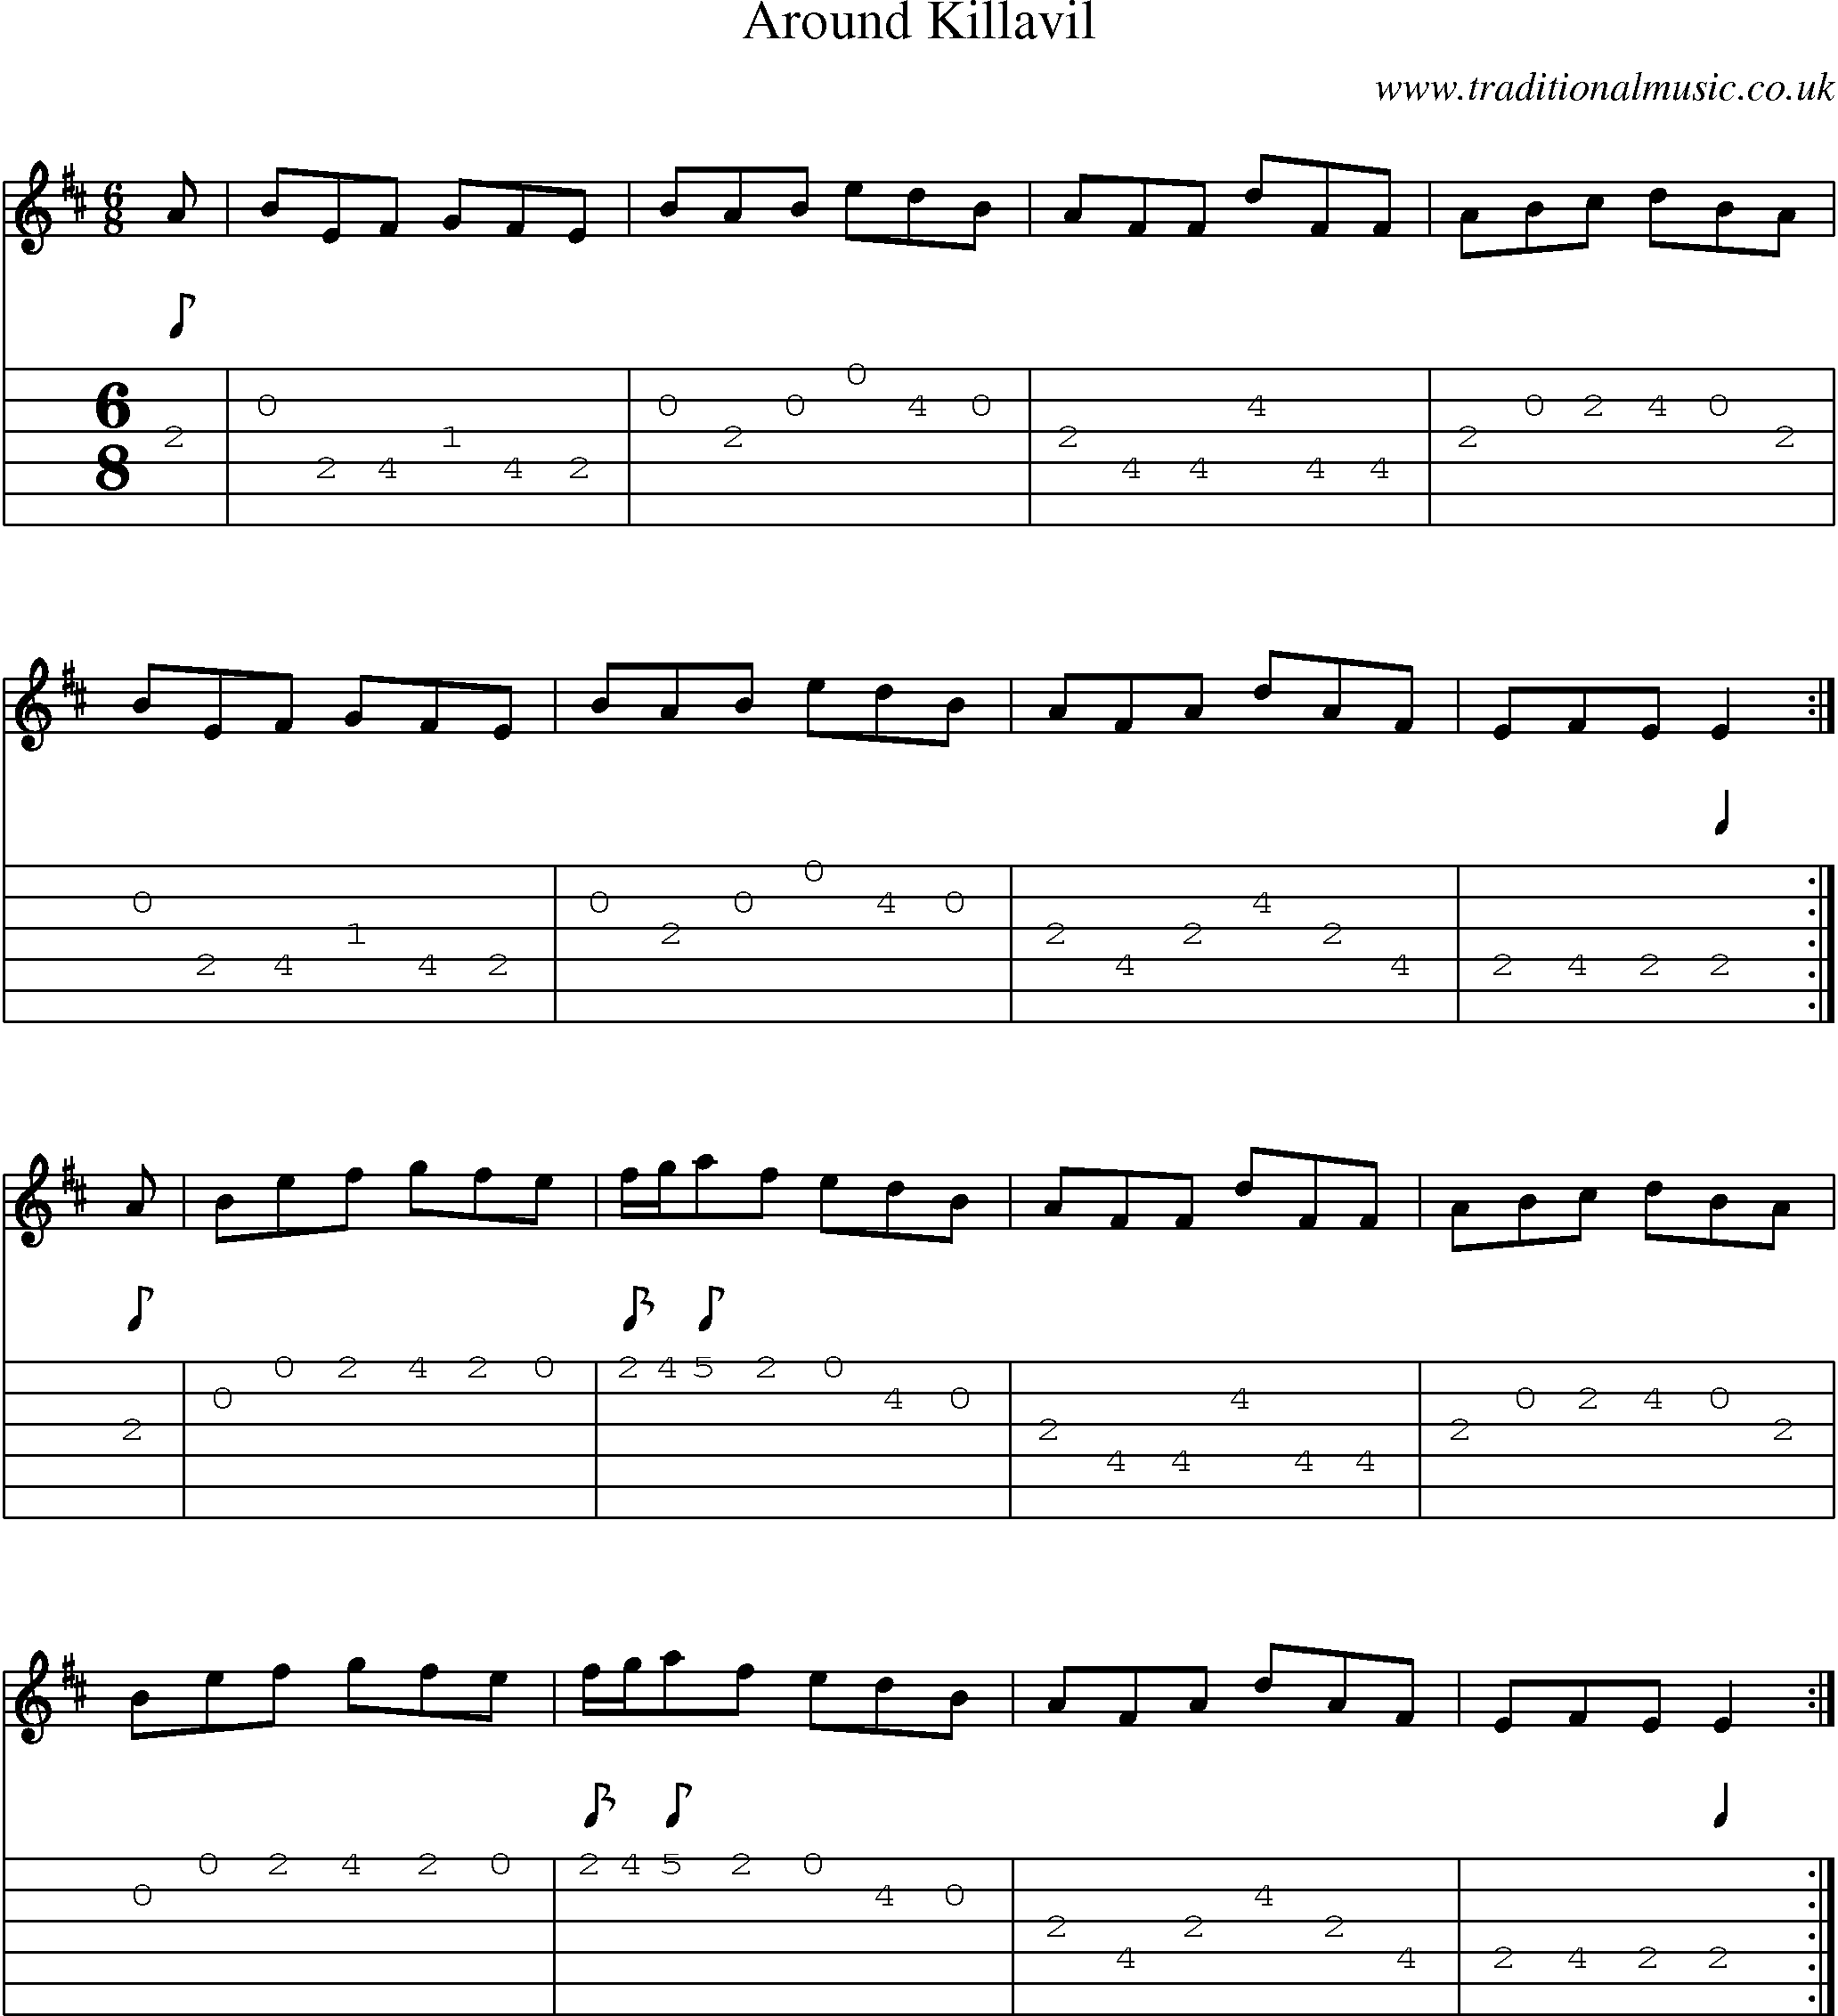 Music Score and Guitar Tabs for Around Killavil